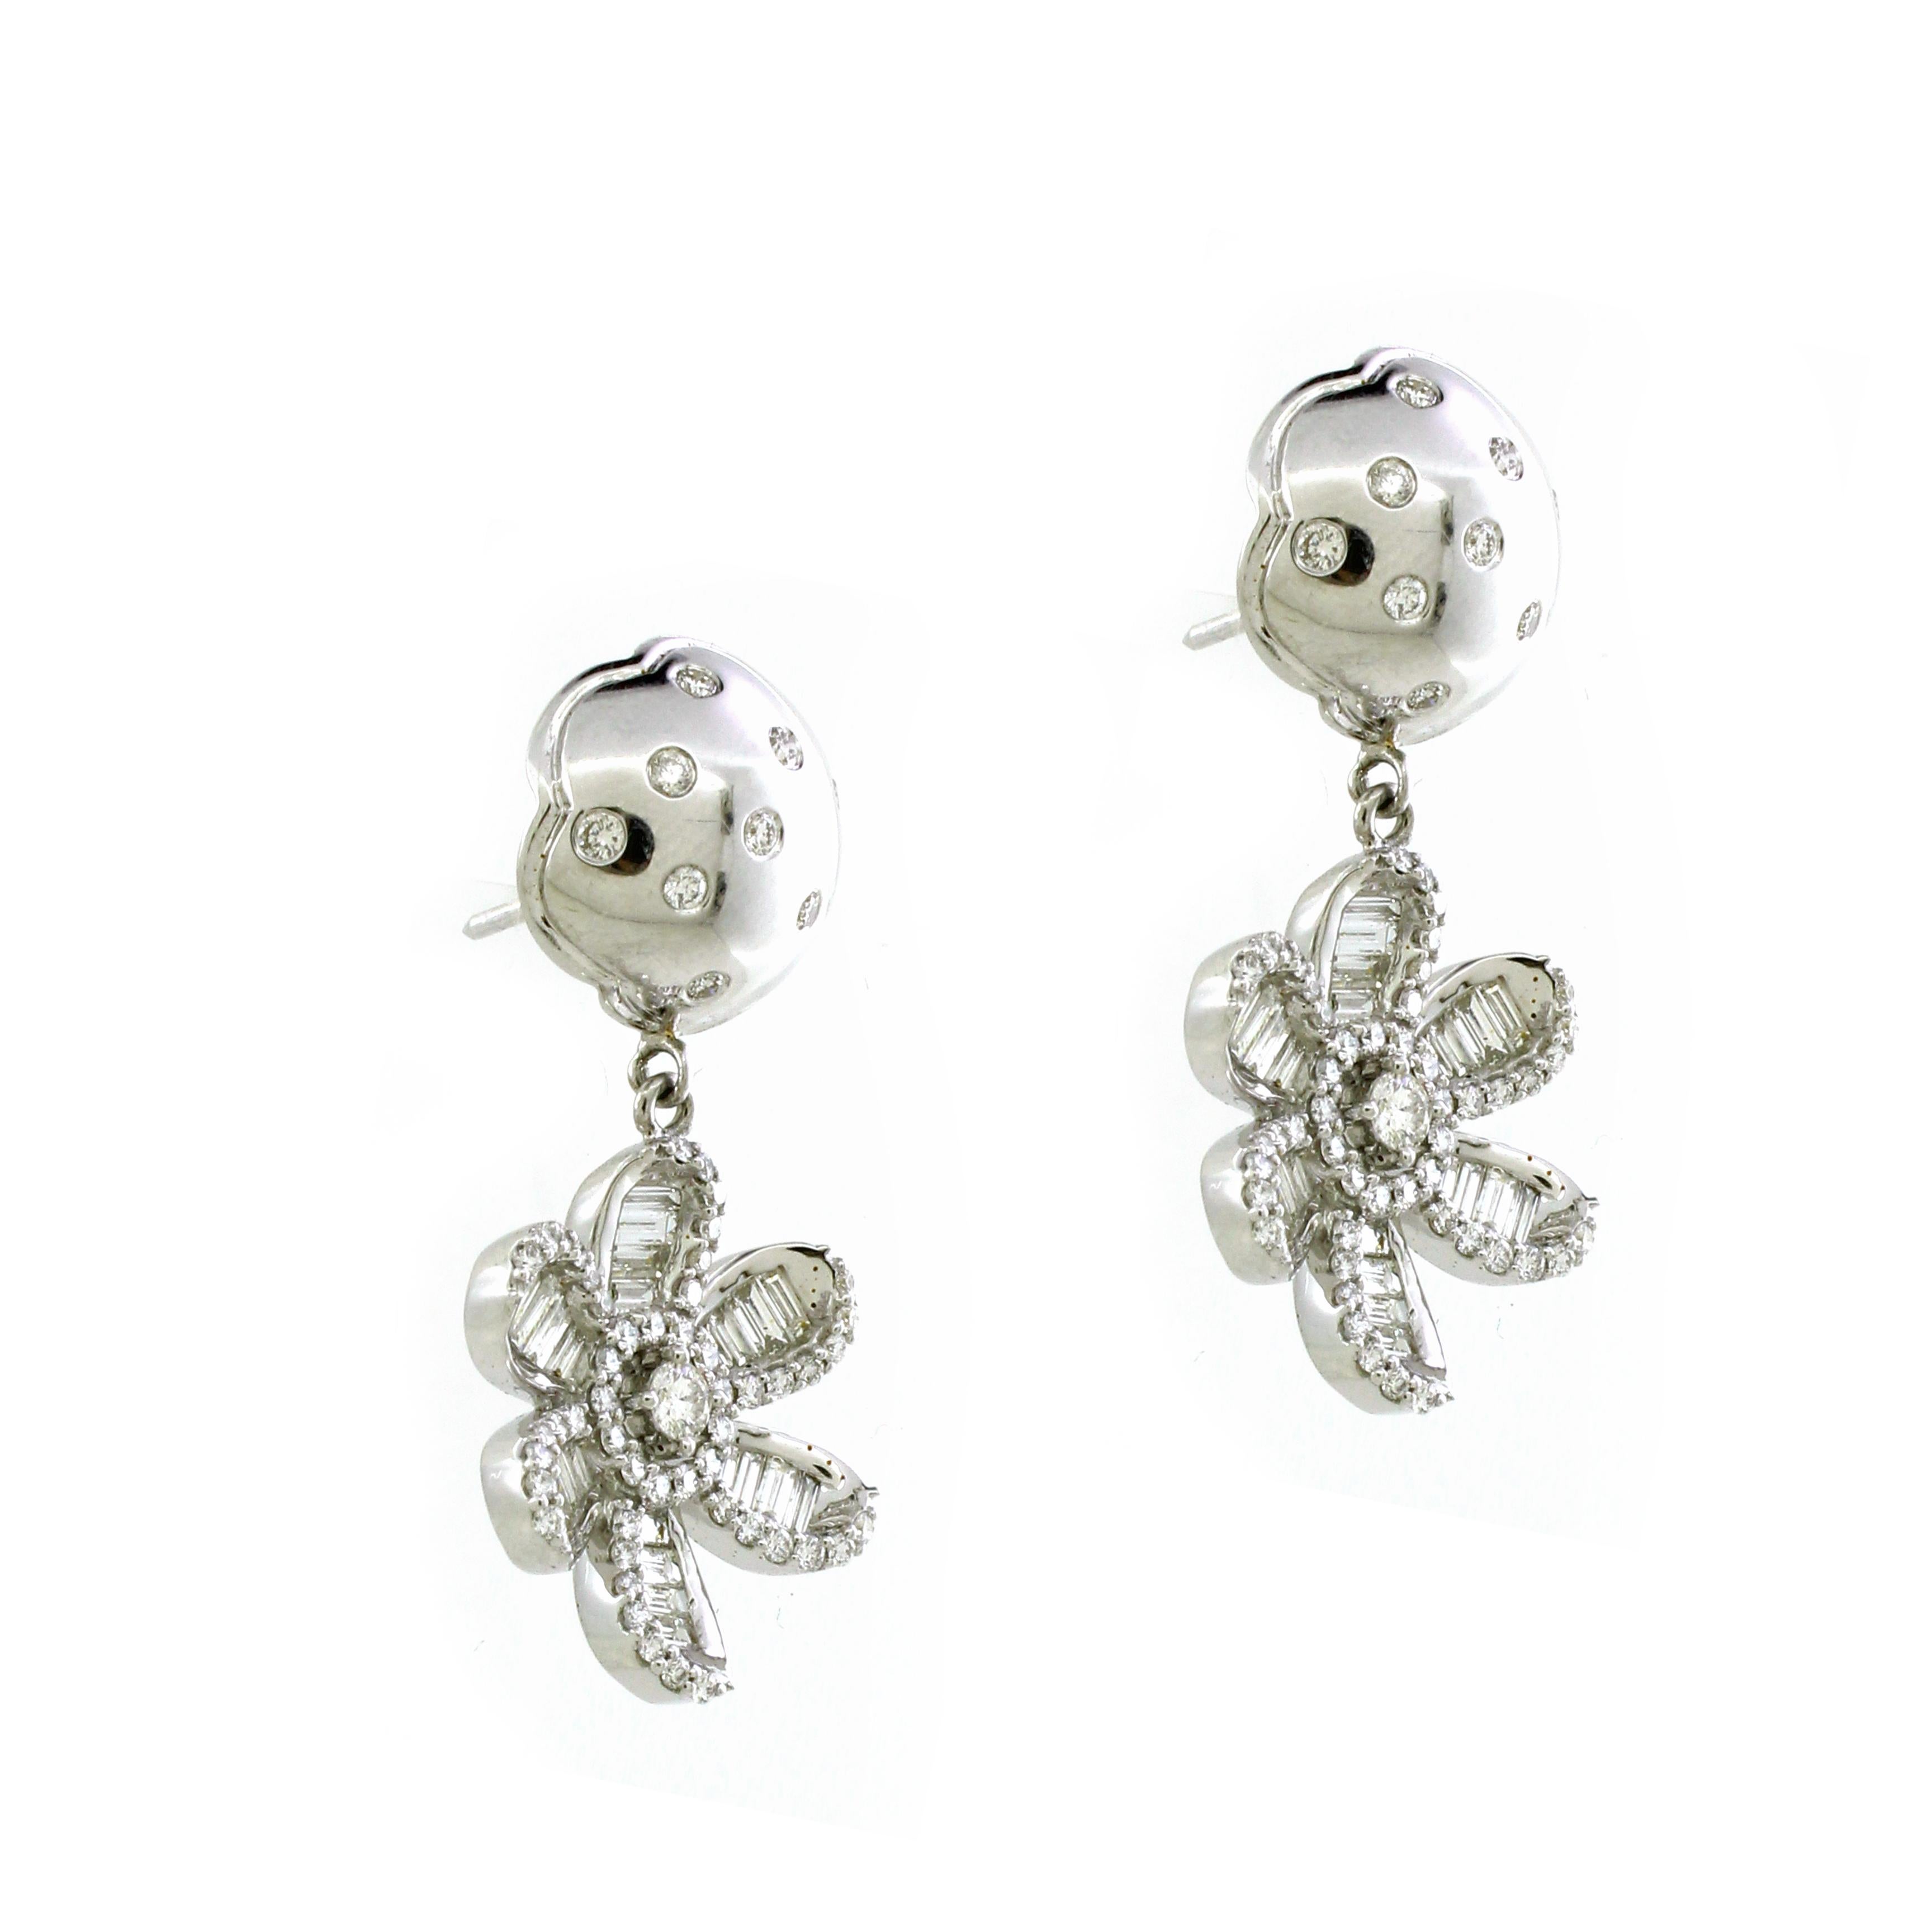 Introducing our Floral Blossom Diamond Earrings, a captivating blend of elegance and charm inspired by the delicate beauty of flowers. These statement earrings feature a total of 1.92 carats of dazzling white round diamonds, comprised of 1.62 carats